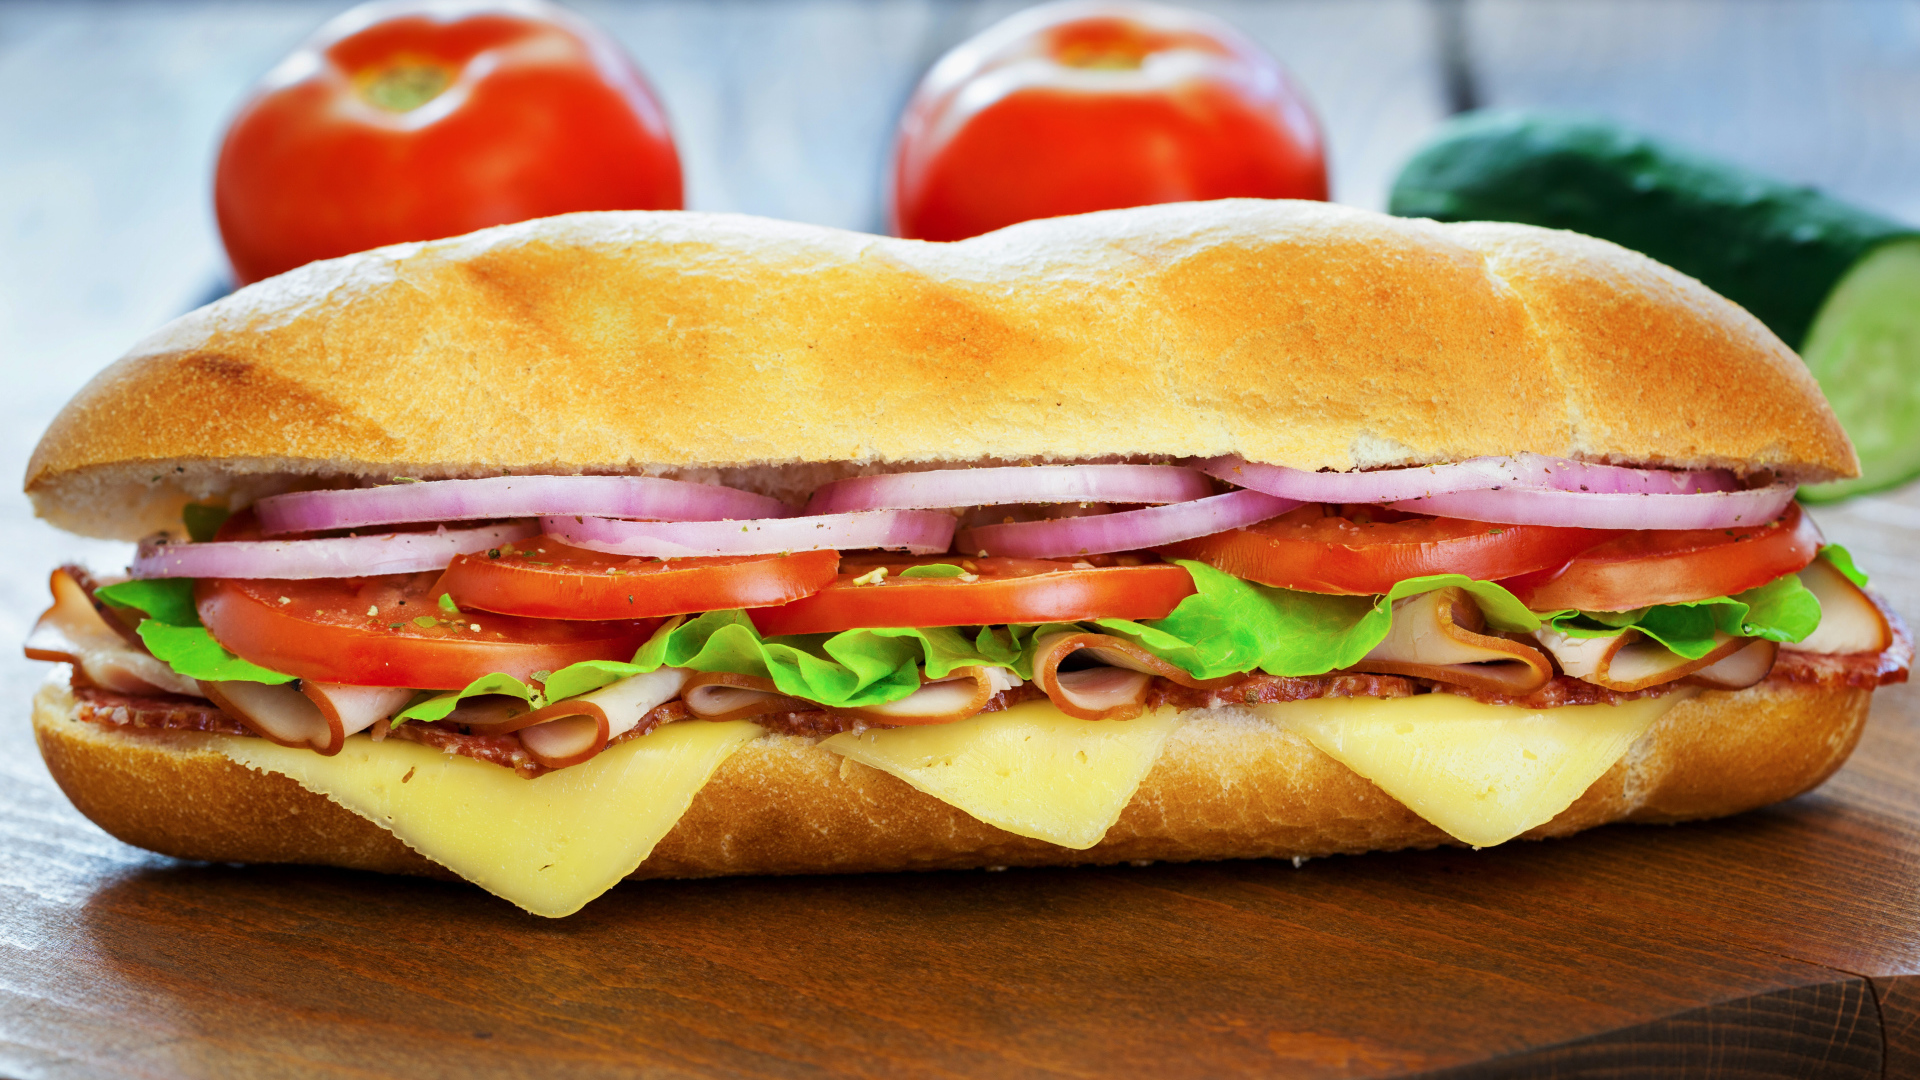 Big sandwich on the table close up Desktop wallpapers 1920x1080